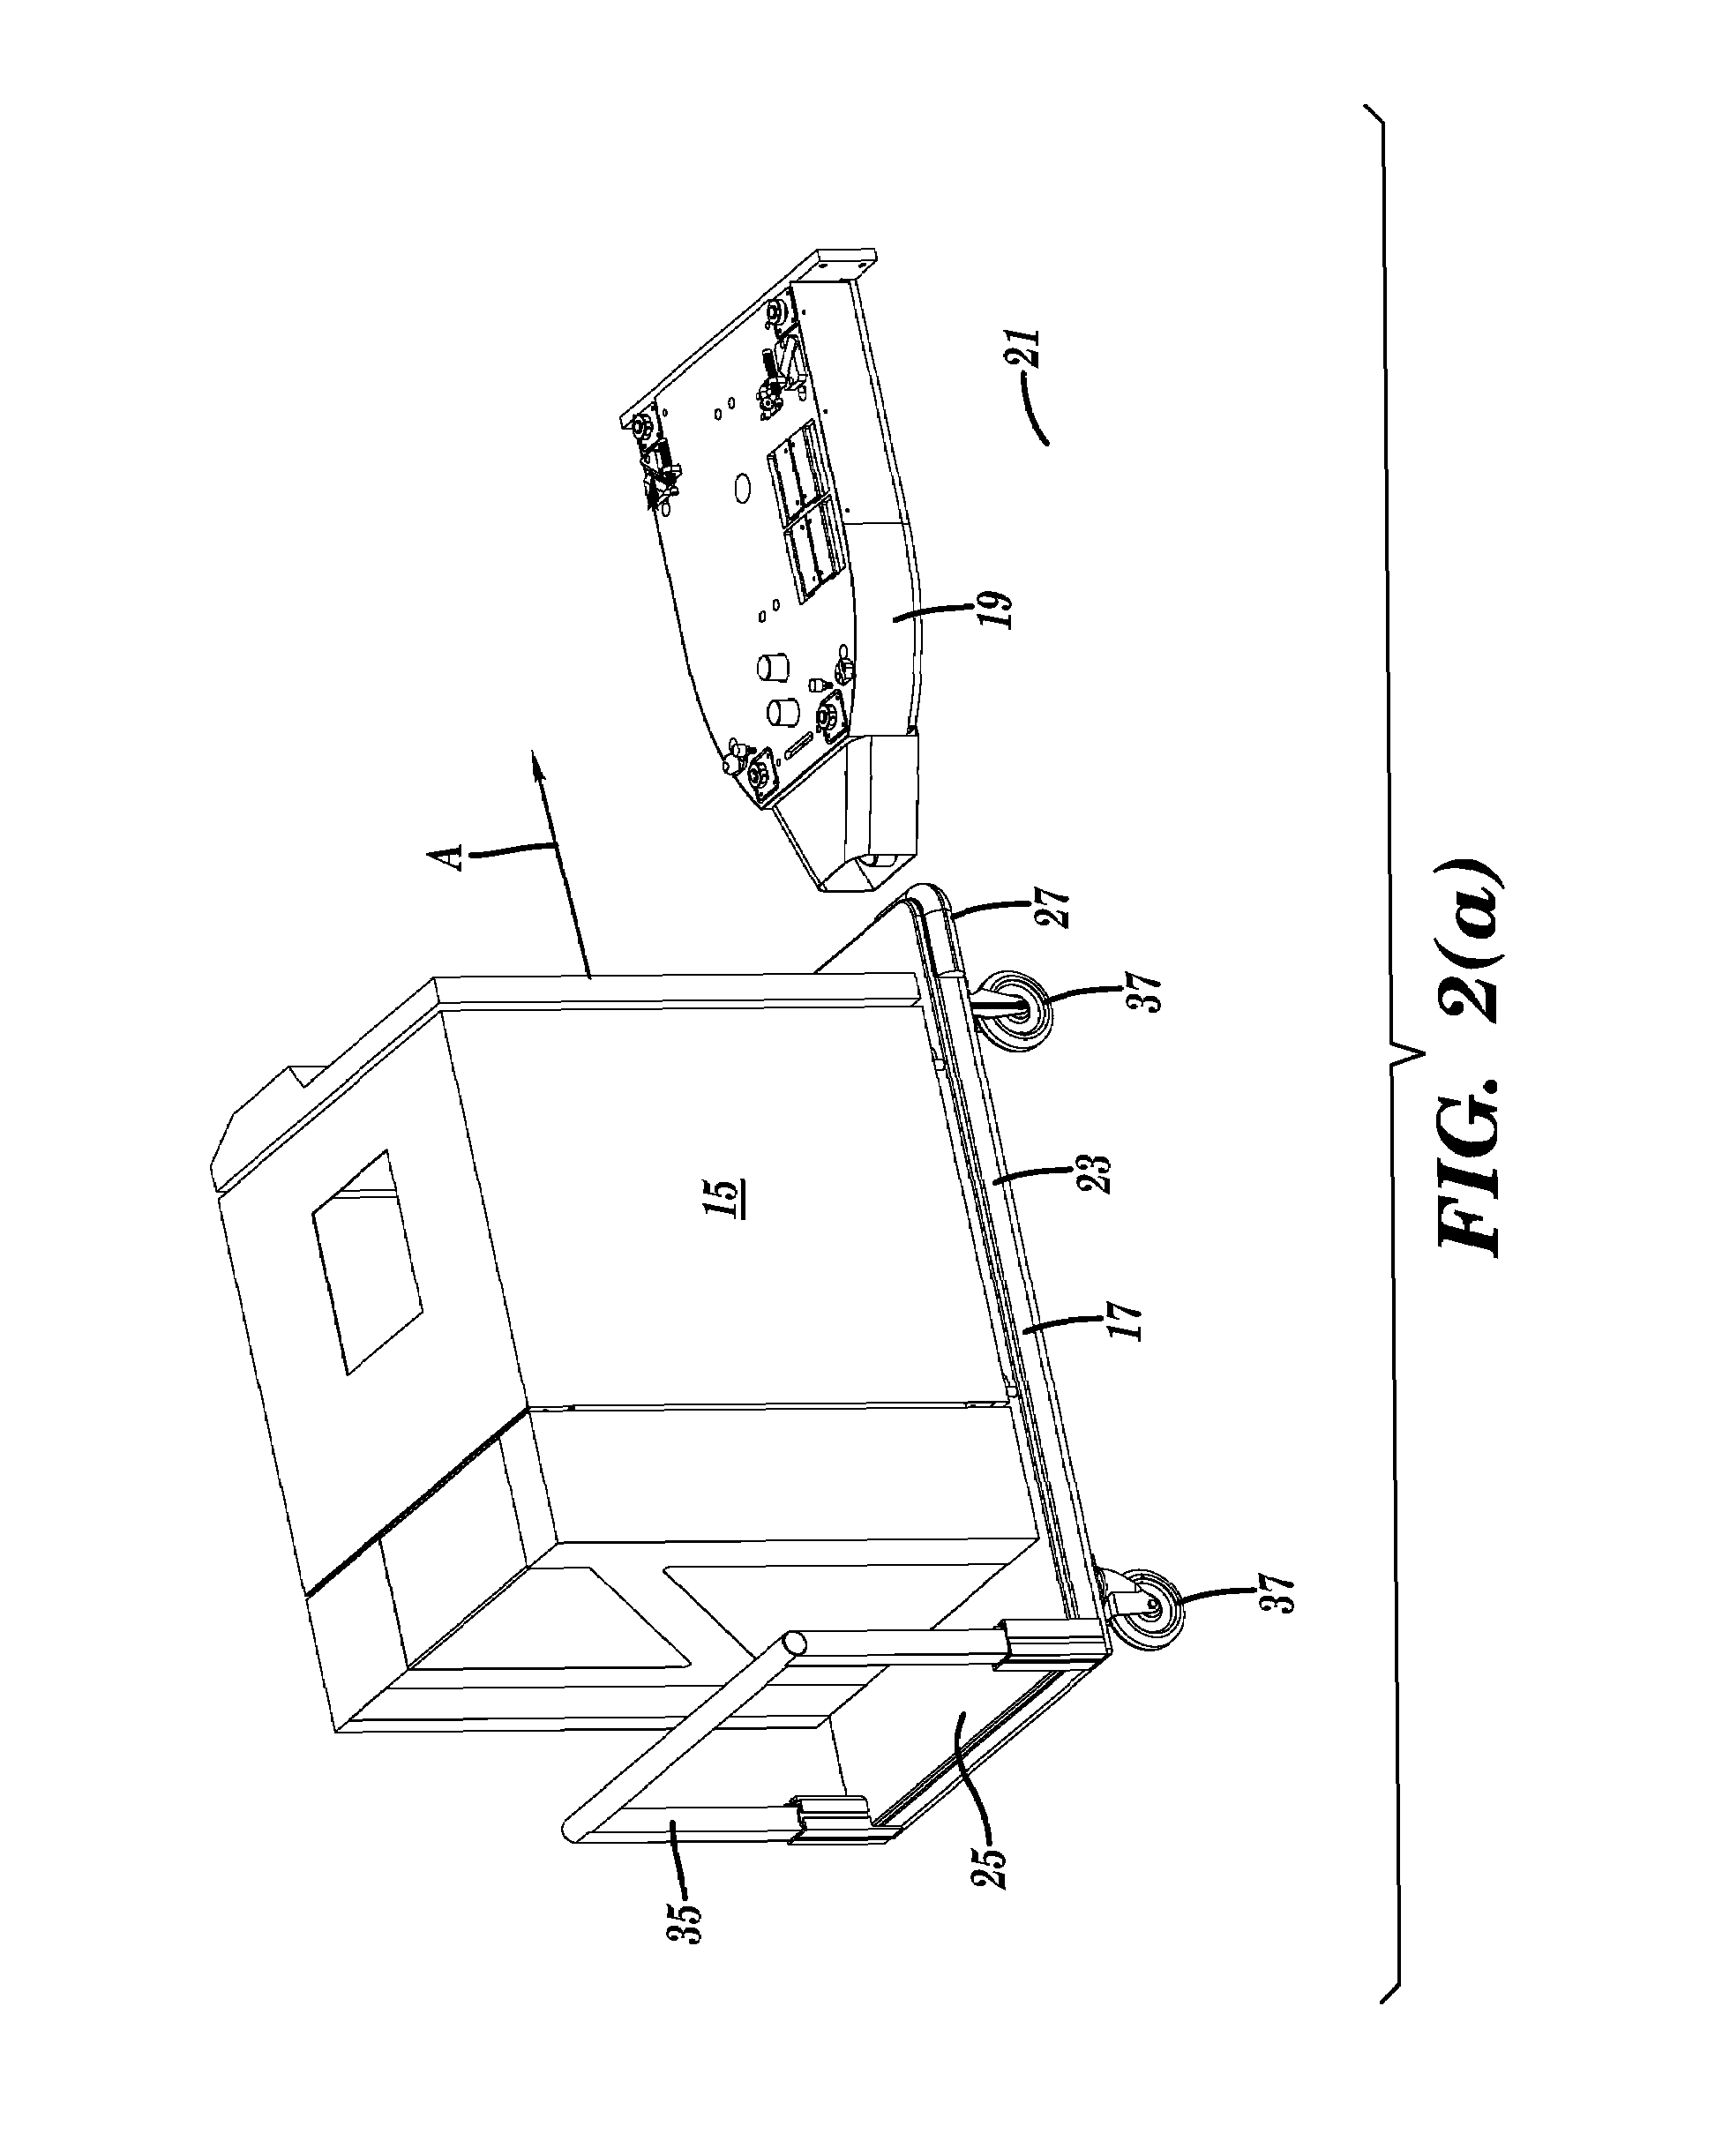 Instrument docking station for an automated testing system